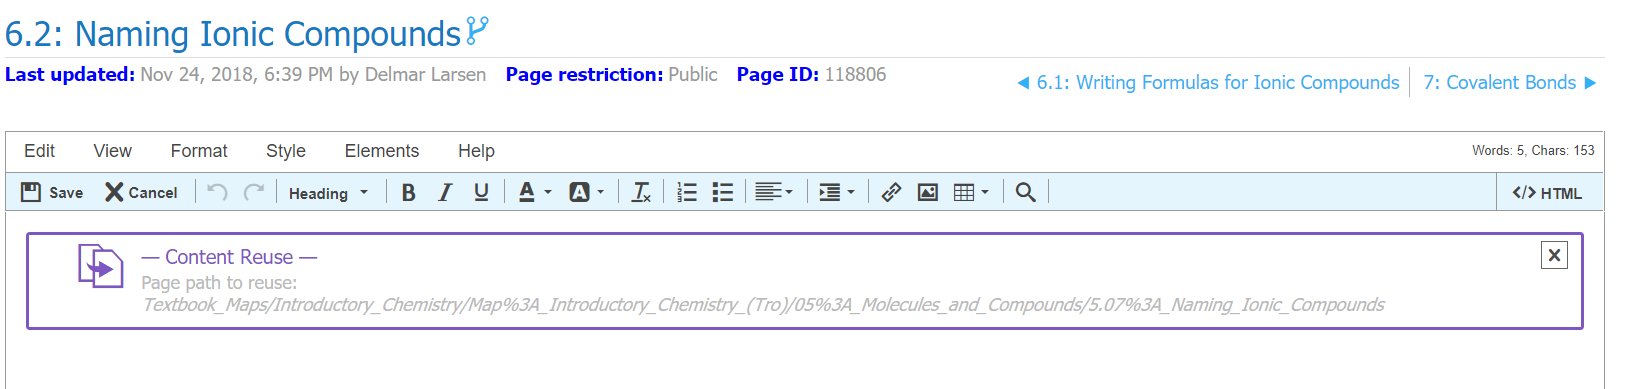 Content reuse box indicates that page your are trying to edit is transcluded from another page